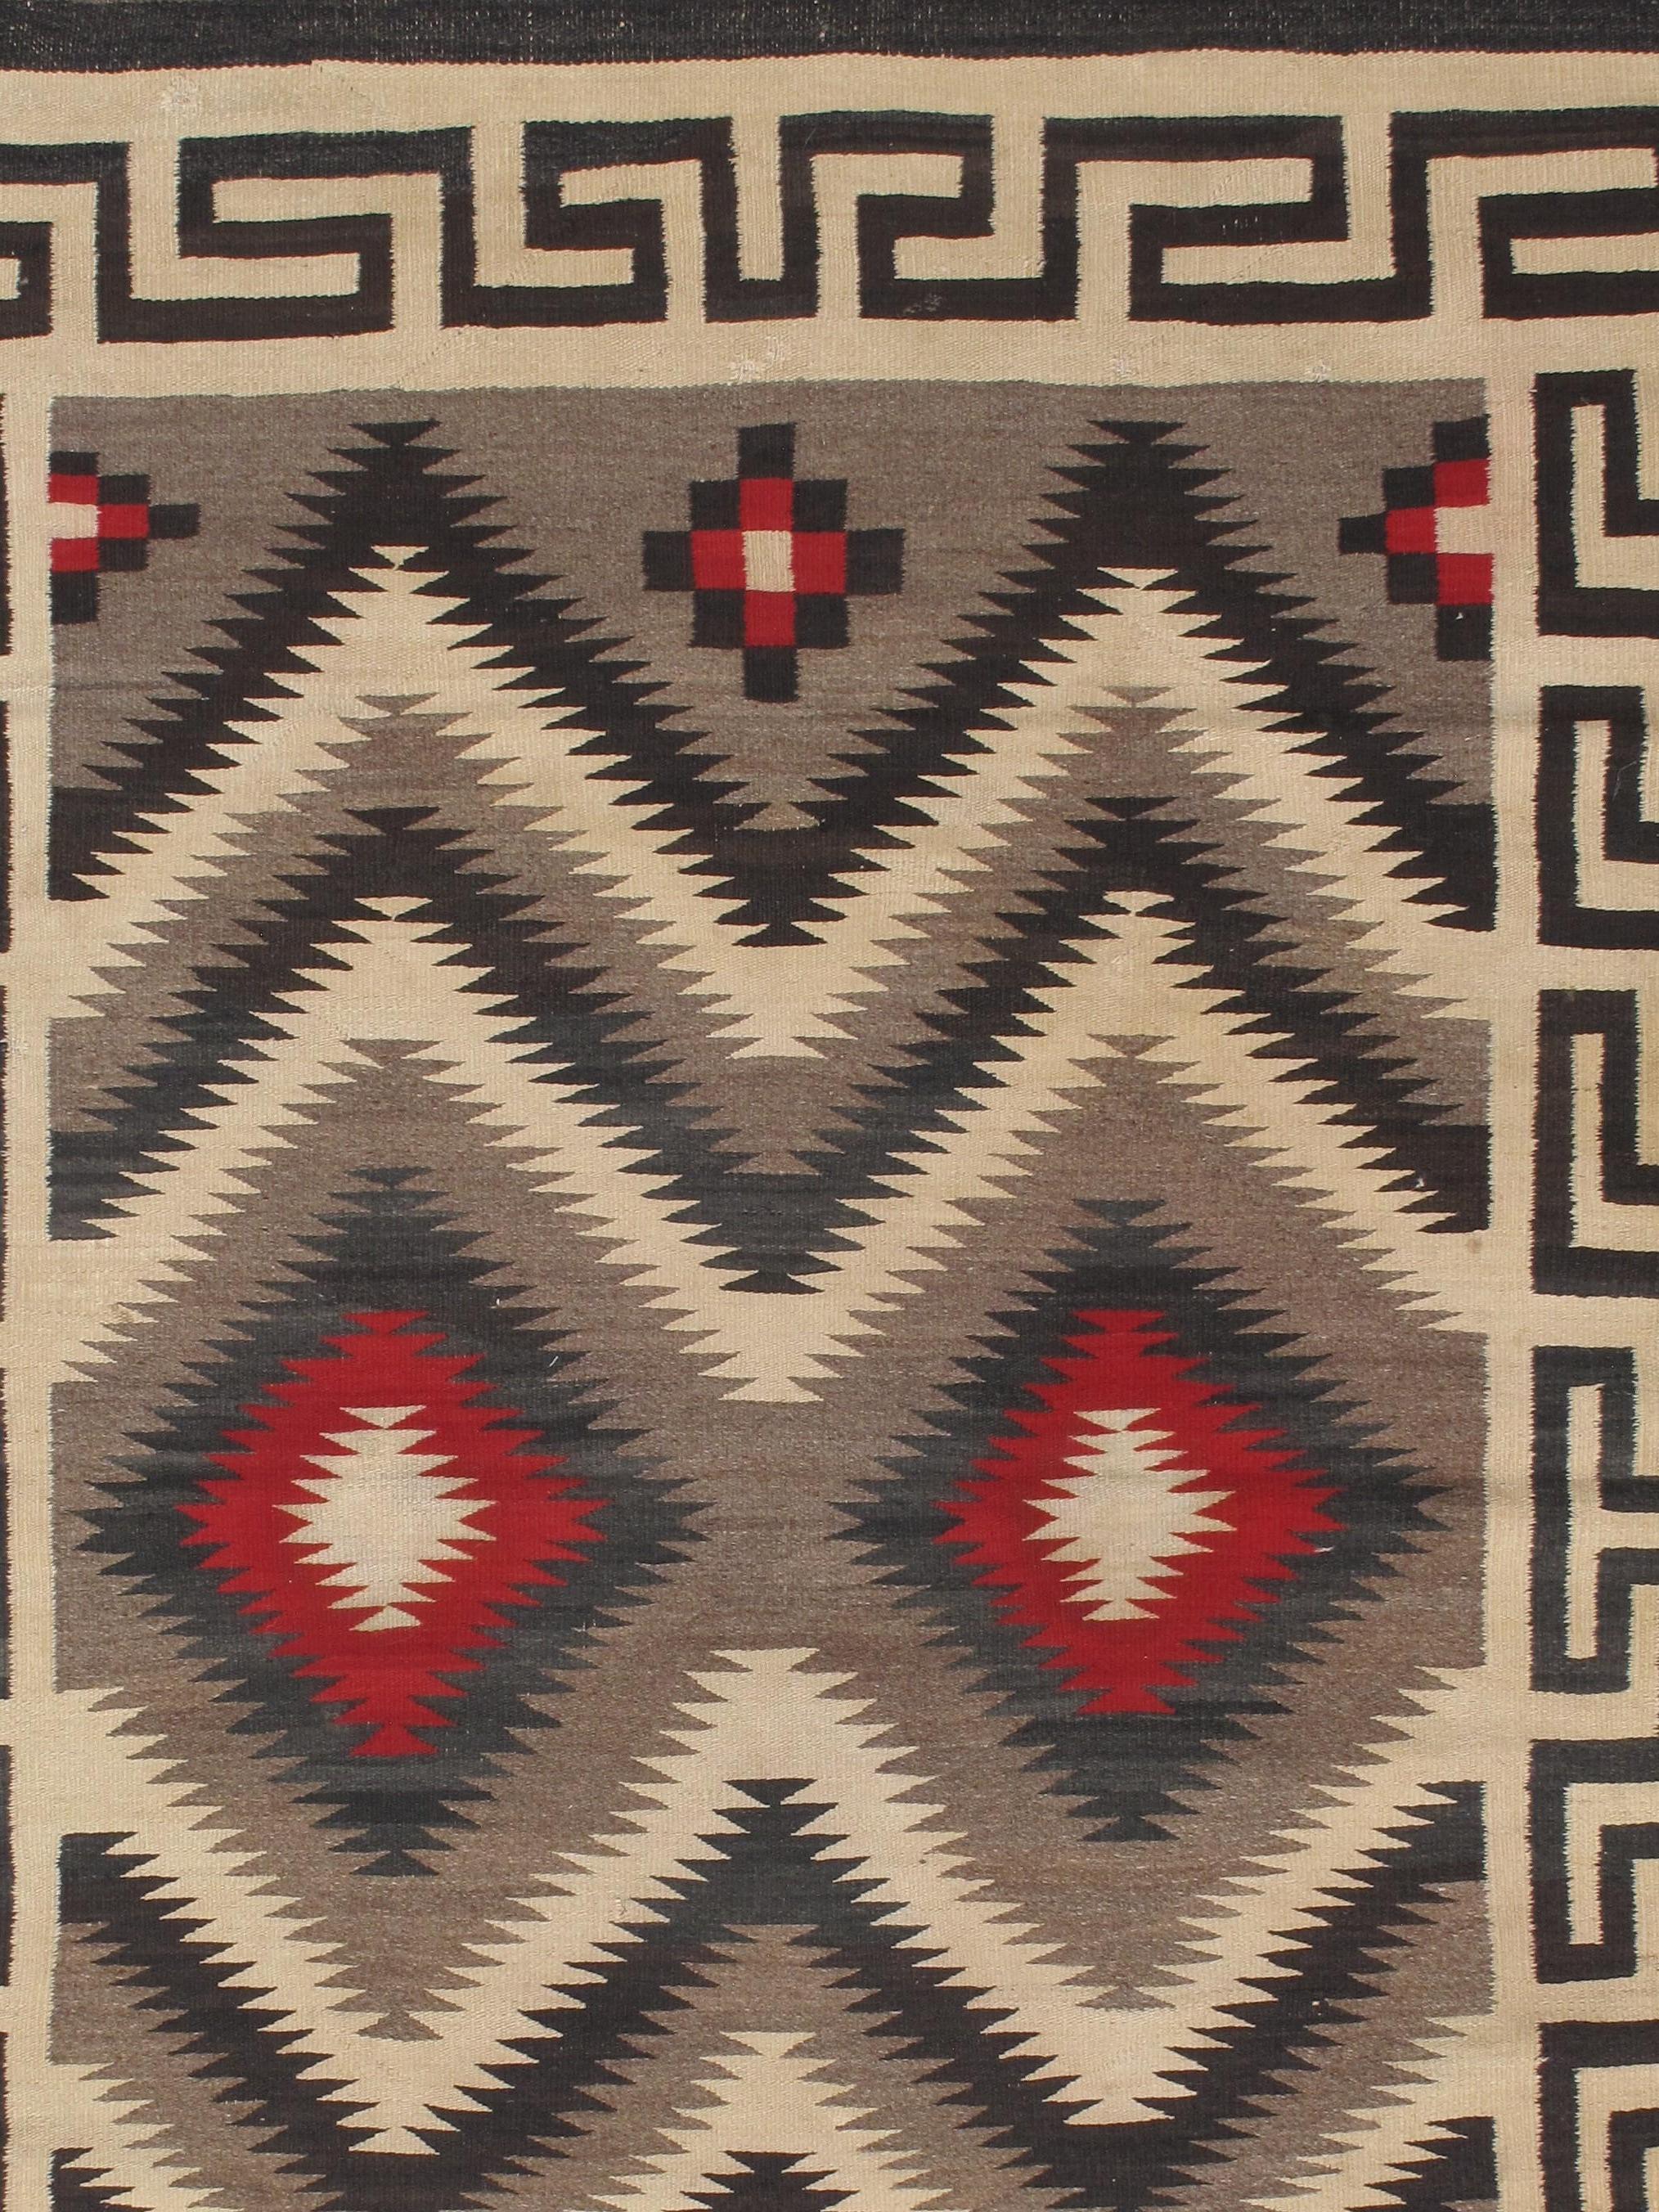 Navajo rugs and blankets are textiles produced by Navajo people of the Four Corners area of the United States. Navajo textiles are highly regarded and have been sought after as trade items for over 150 years. Commercial production of handwoven